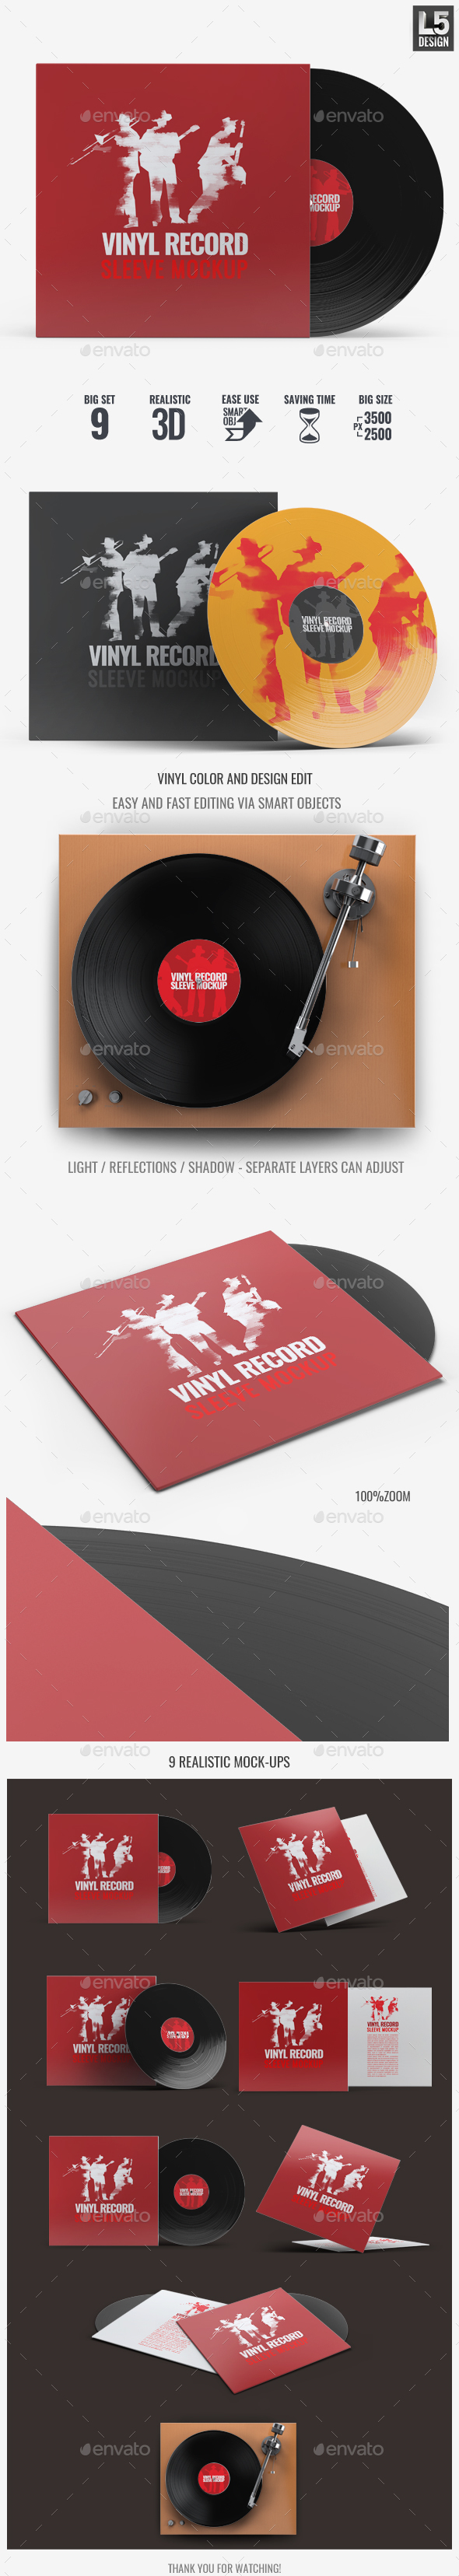 Download Vinyl Record Sleeve Mock Up By L5design Graphicriver